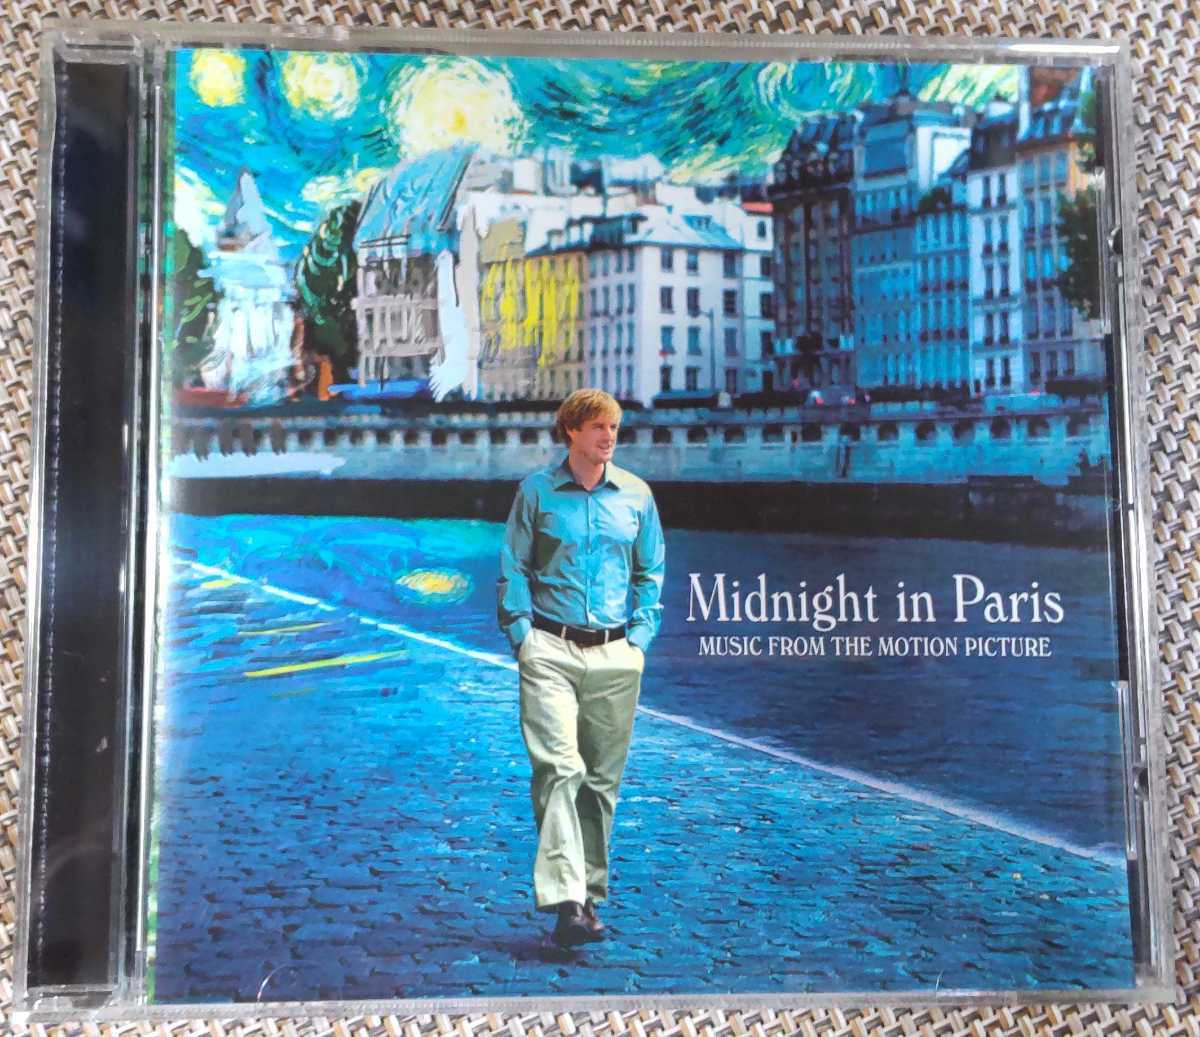 ! ude .*a Len direction work movie [ midnight * in * Paris Midnight in Paris]MUSIC FROM THE MOTION PICTURE foreign record CD!